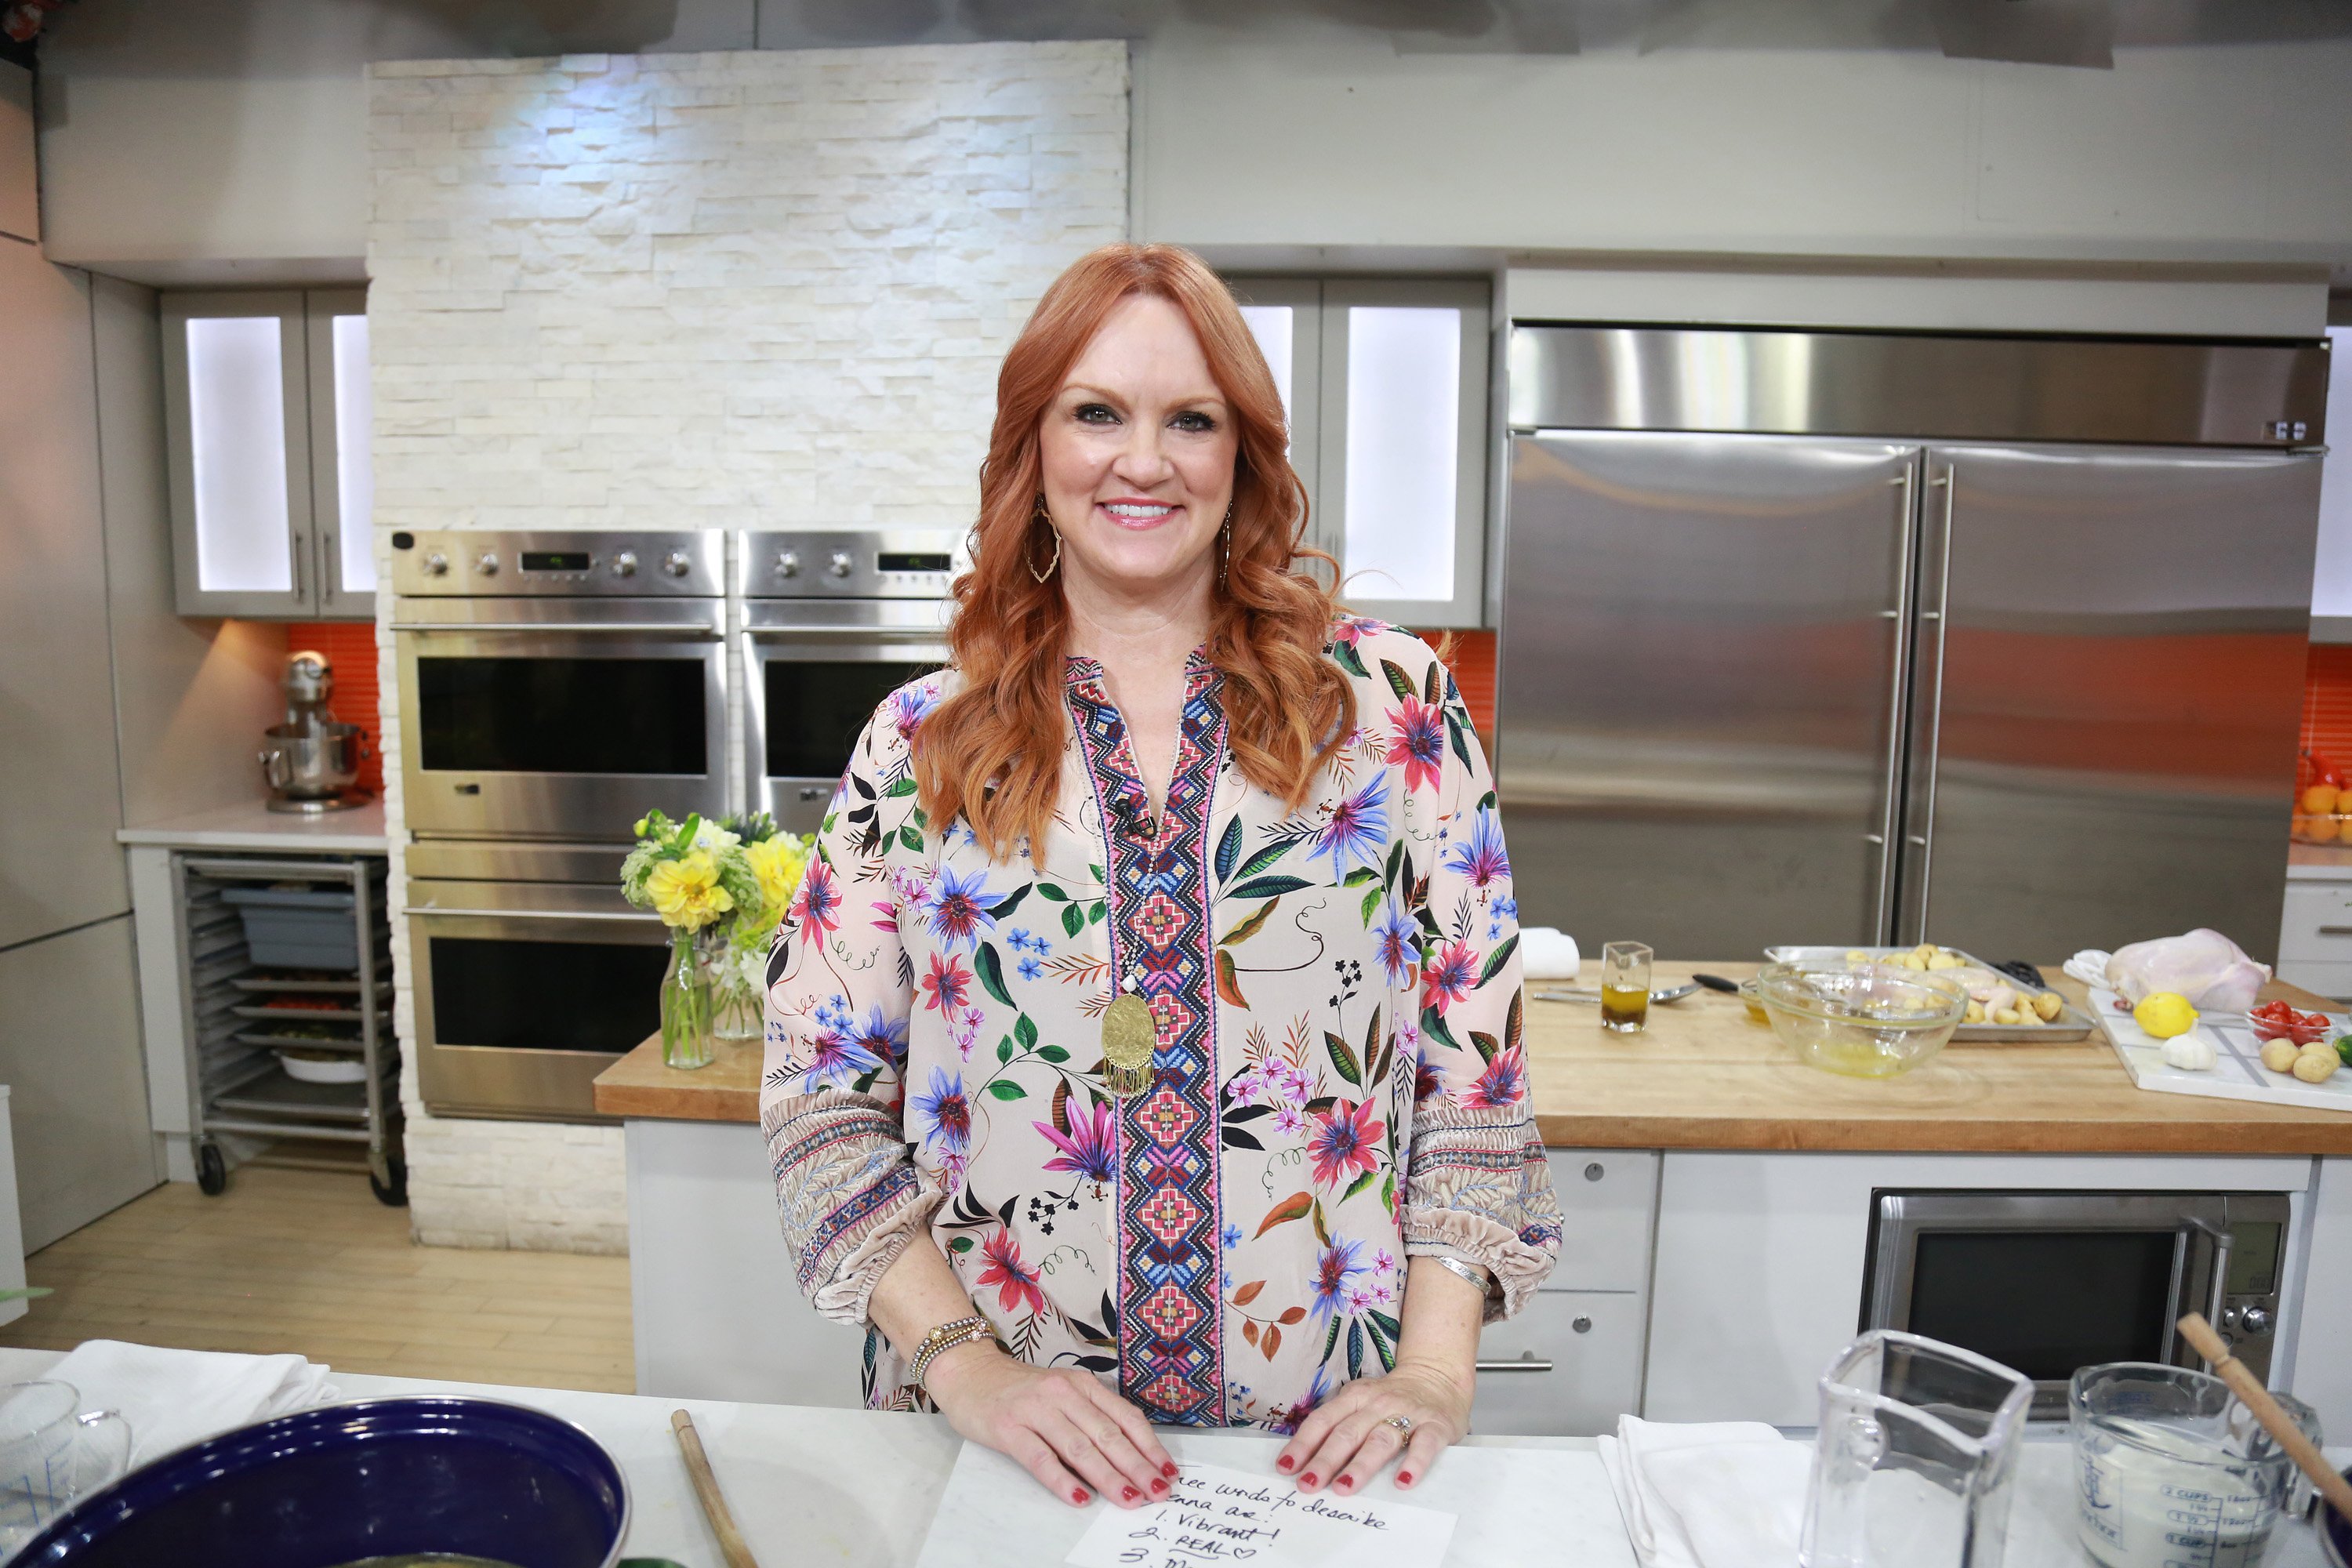 The Pioneer Woman': Ree Drummond's Daughter Alex Shares a Message About  Body Positivity: 'People Come in All Shapes and Sizes